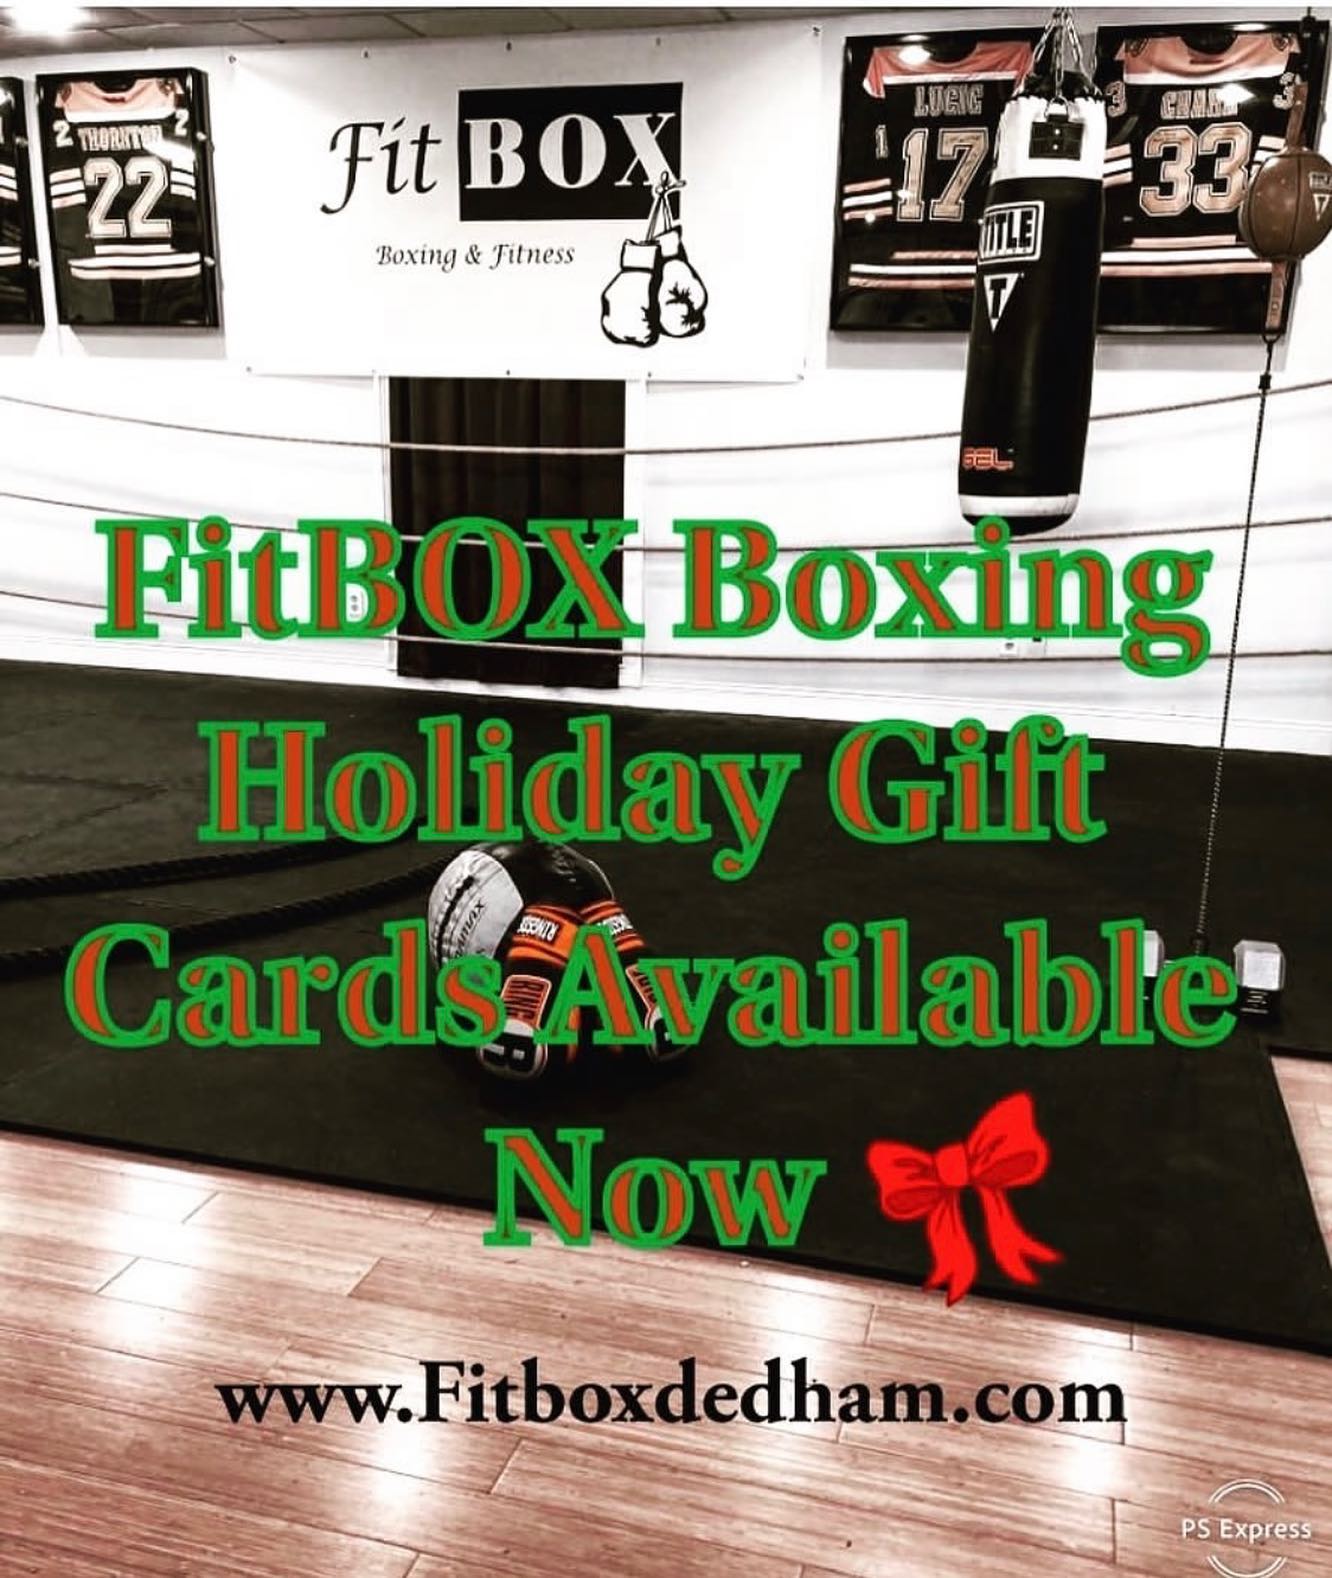 There is no better gift for Christmas then the gift to throw a punch . Contact us today to learn more about our holiday savings gift cards . Phone/text (781)727-9503 or email fitbox@outlook.com